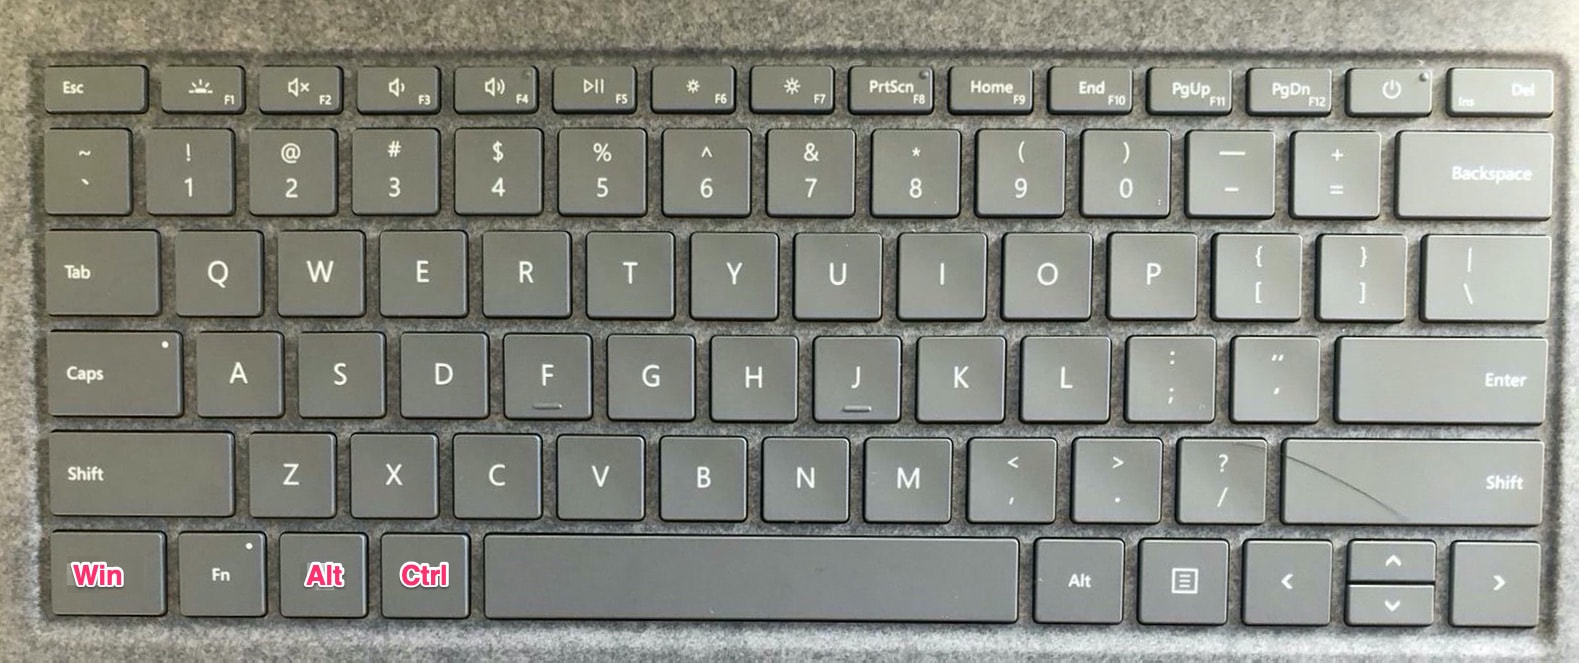 Changed positions of Ctrl, Alt, and Win key on the Window's keyboard.